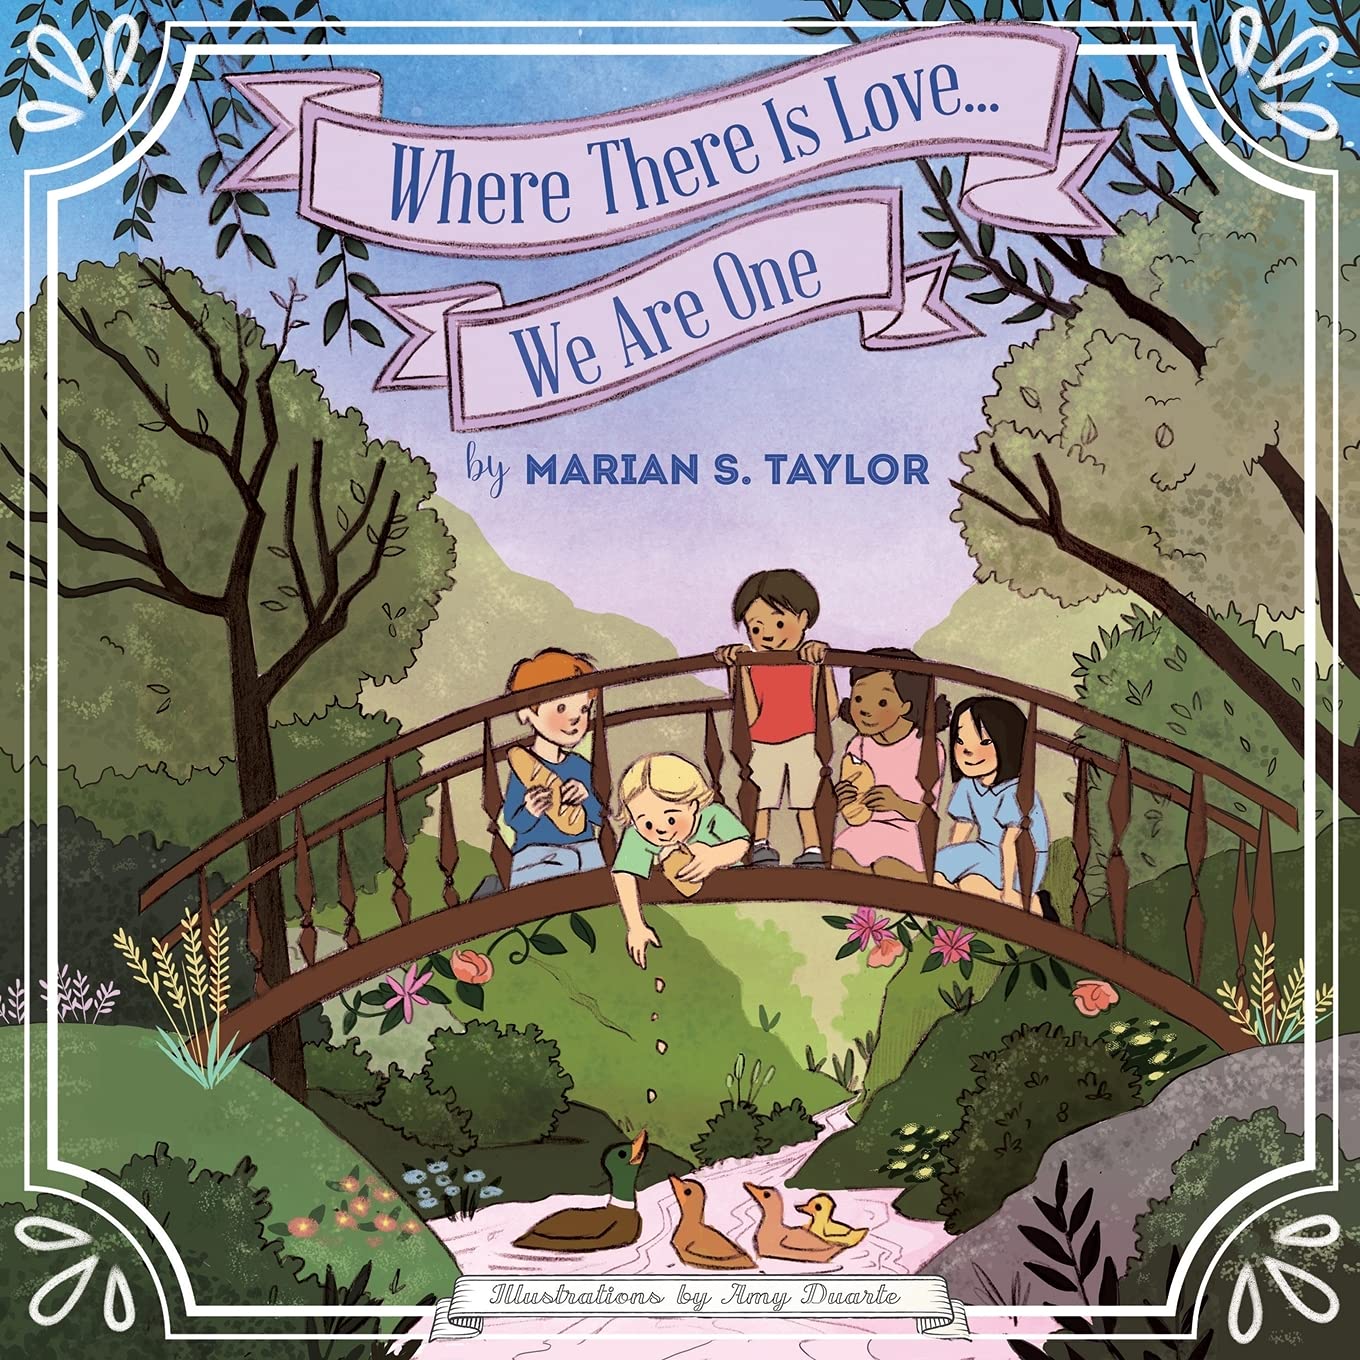 Marian S. Taylor launches new children's picture book, "There Is Love... We Are One'', illustrated by Amy Duarte